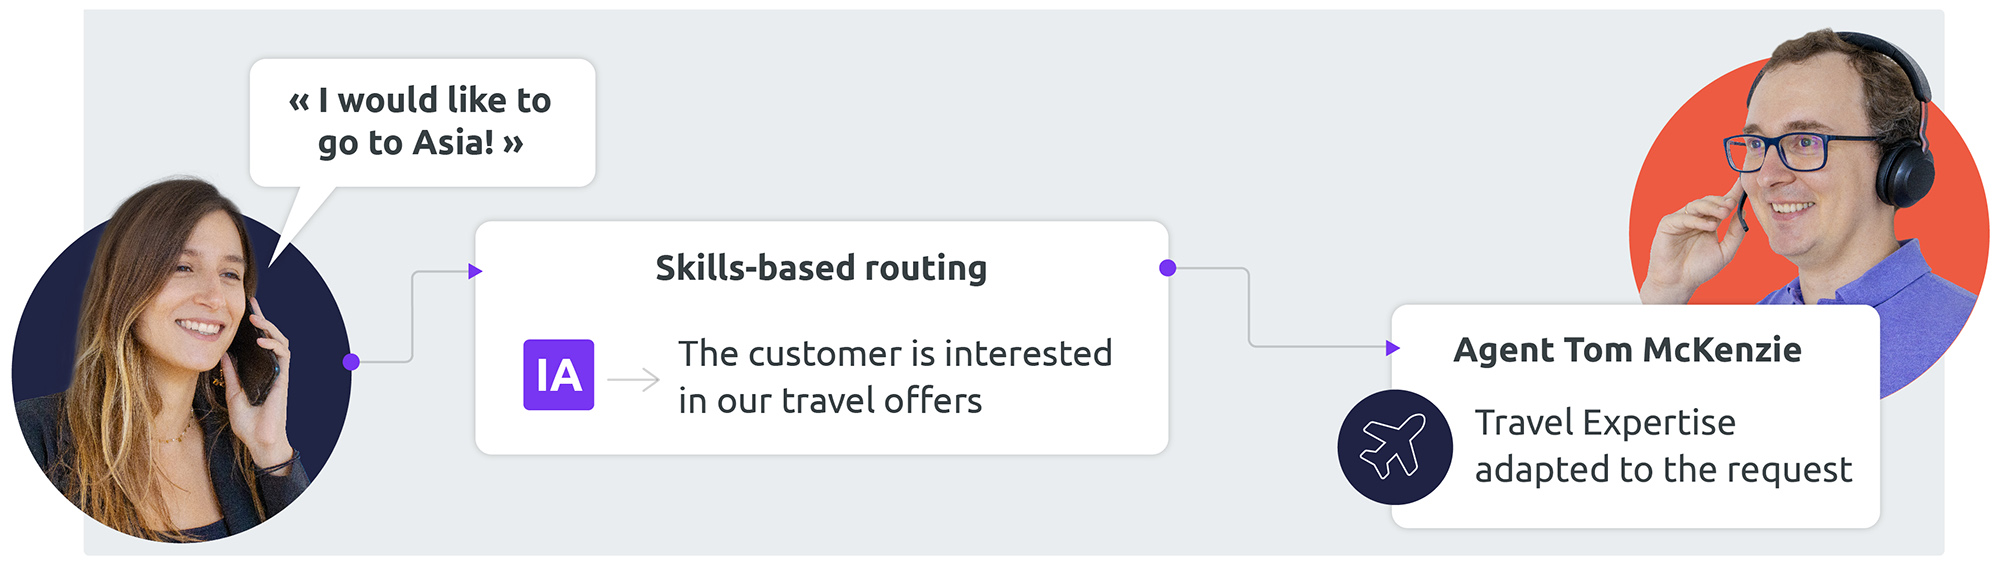 Customer call routing based on agent skills 